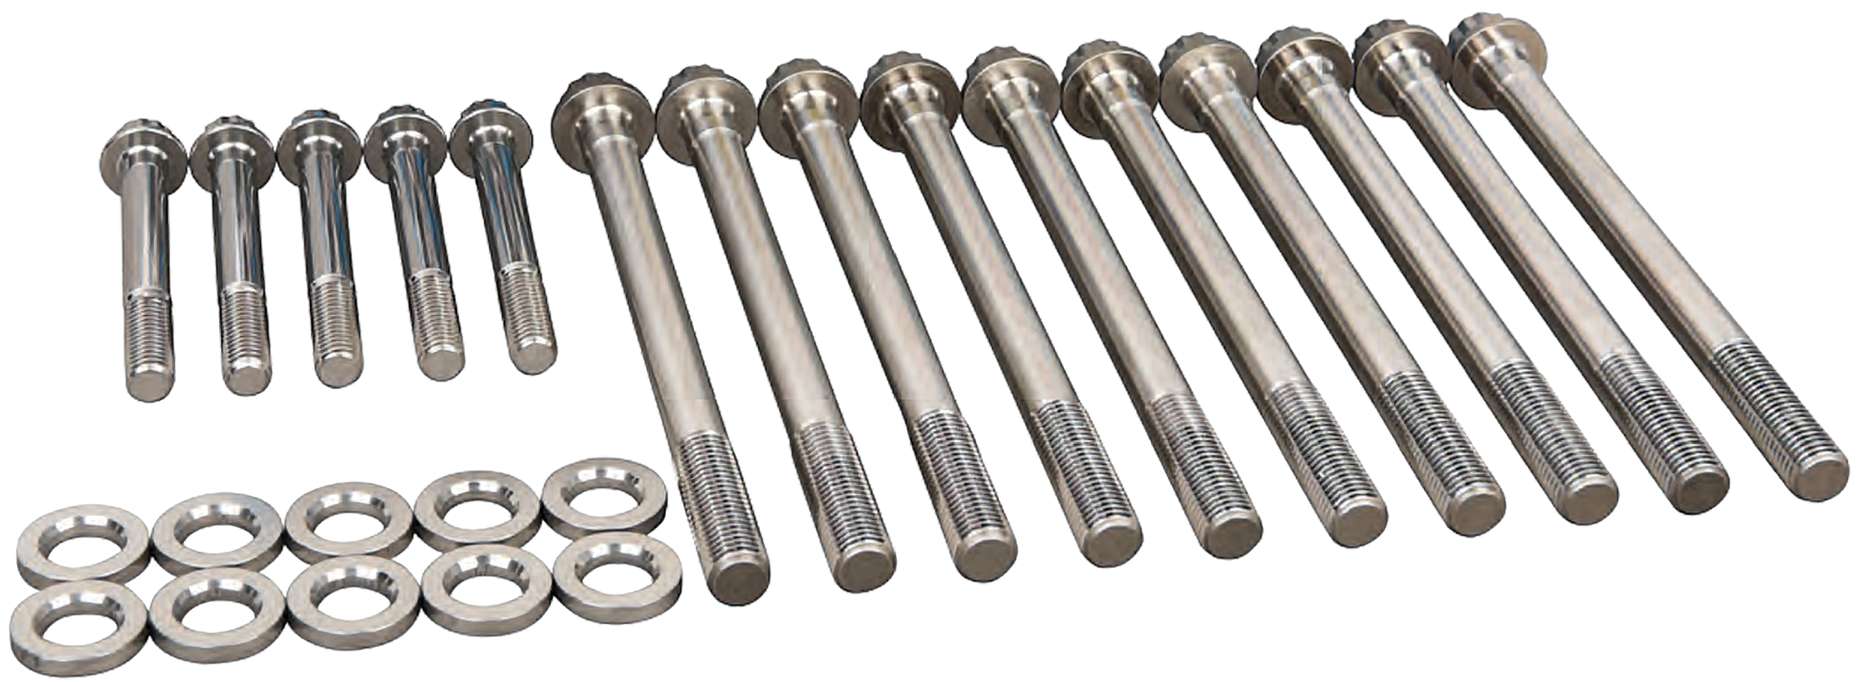 arp case bolts